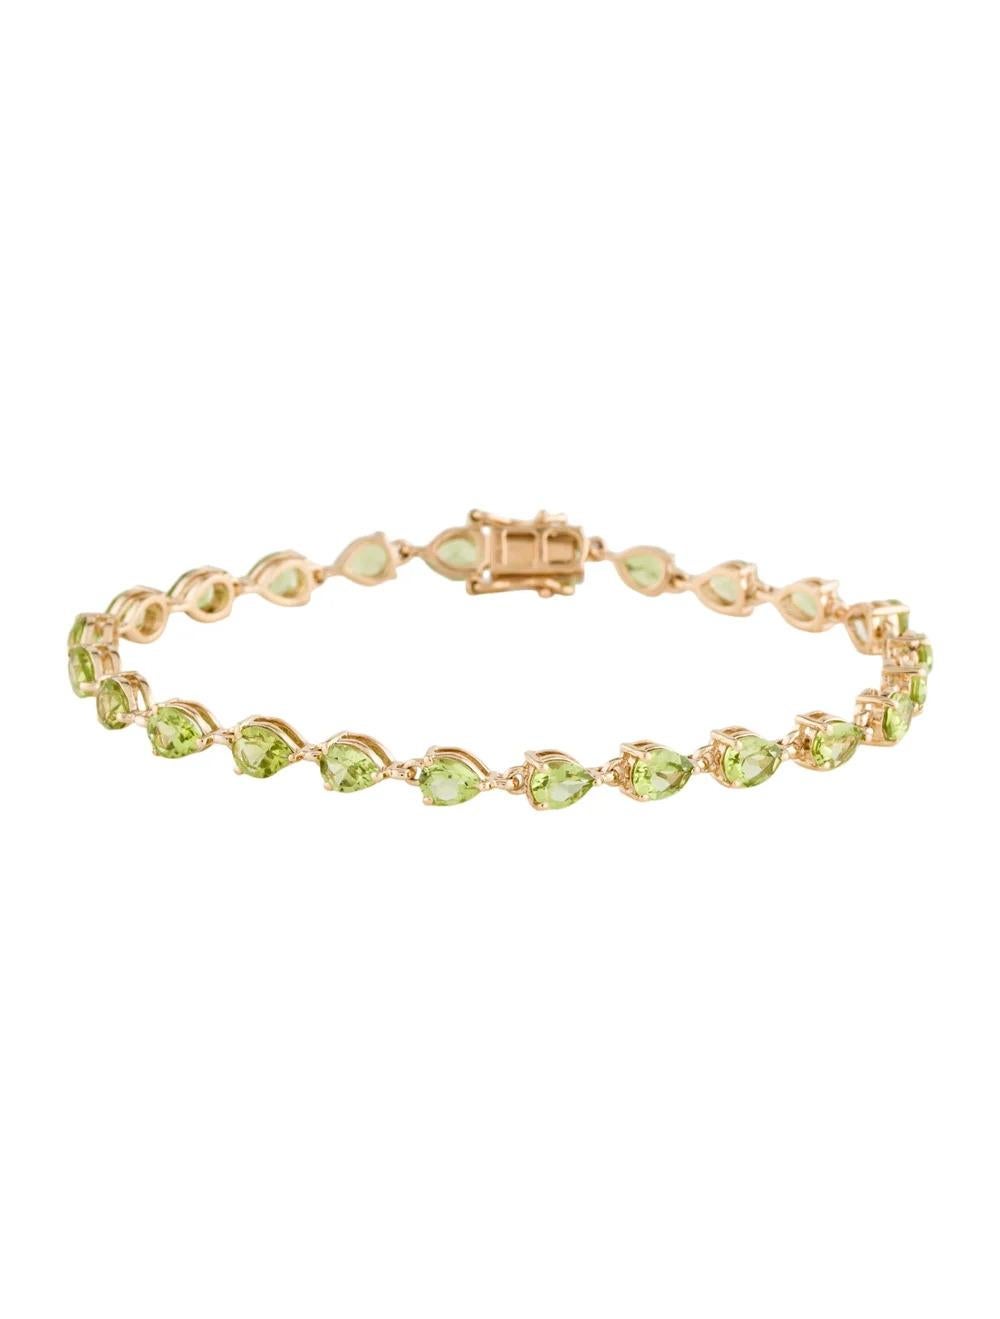 Introducing a captivating piece of fine jewelry, this exquisite 14K Yellow Gold Peridot Link Bracelet is a true statement of elegance and style. Crafted with meticulous attention to detail, it features a stunning 6.96 Carat Pear Brilliant Peridot,